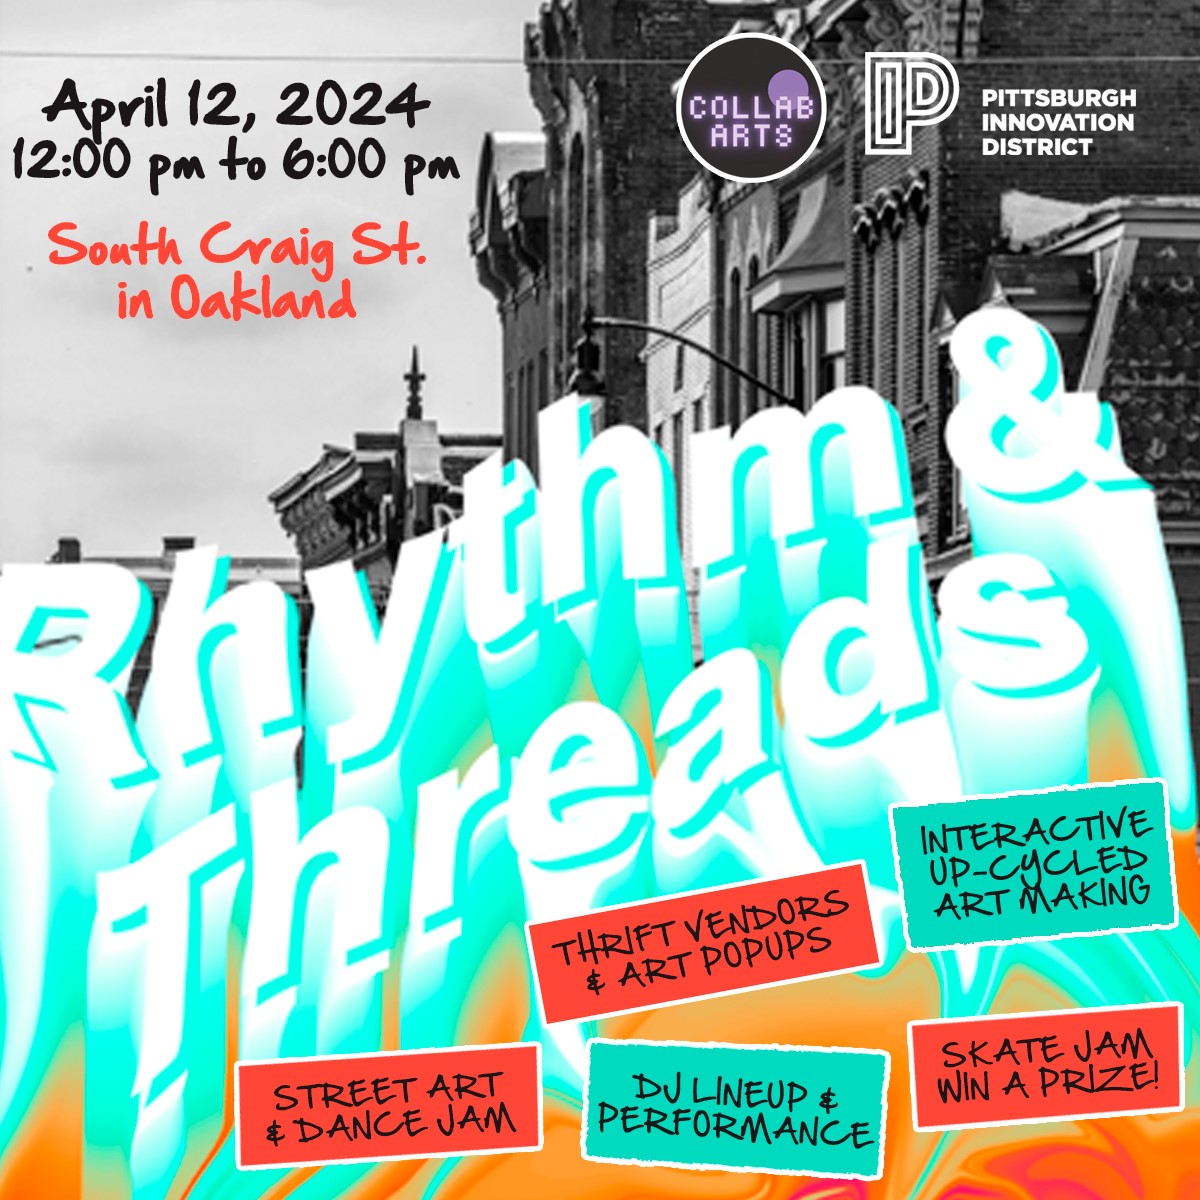 ⚠️ NOTICE ⚠️ South Craig Street will be closed tomorrow, April 12, from 12 p.m. to 6 p.m. for Rhythm & Threads, a project collaboration of the Pittsburgh Innovation District, 1Hood Media, and other participating groups. Learn more about the event at bit.ly/RhythmandThrea…